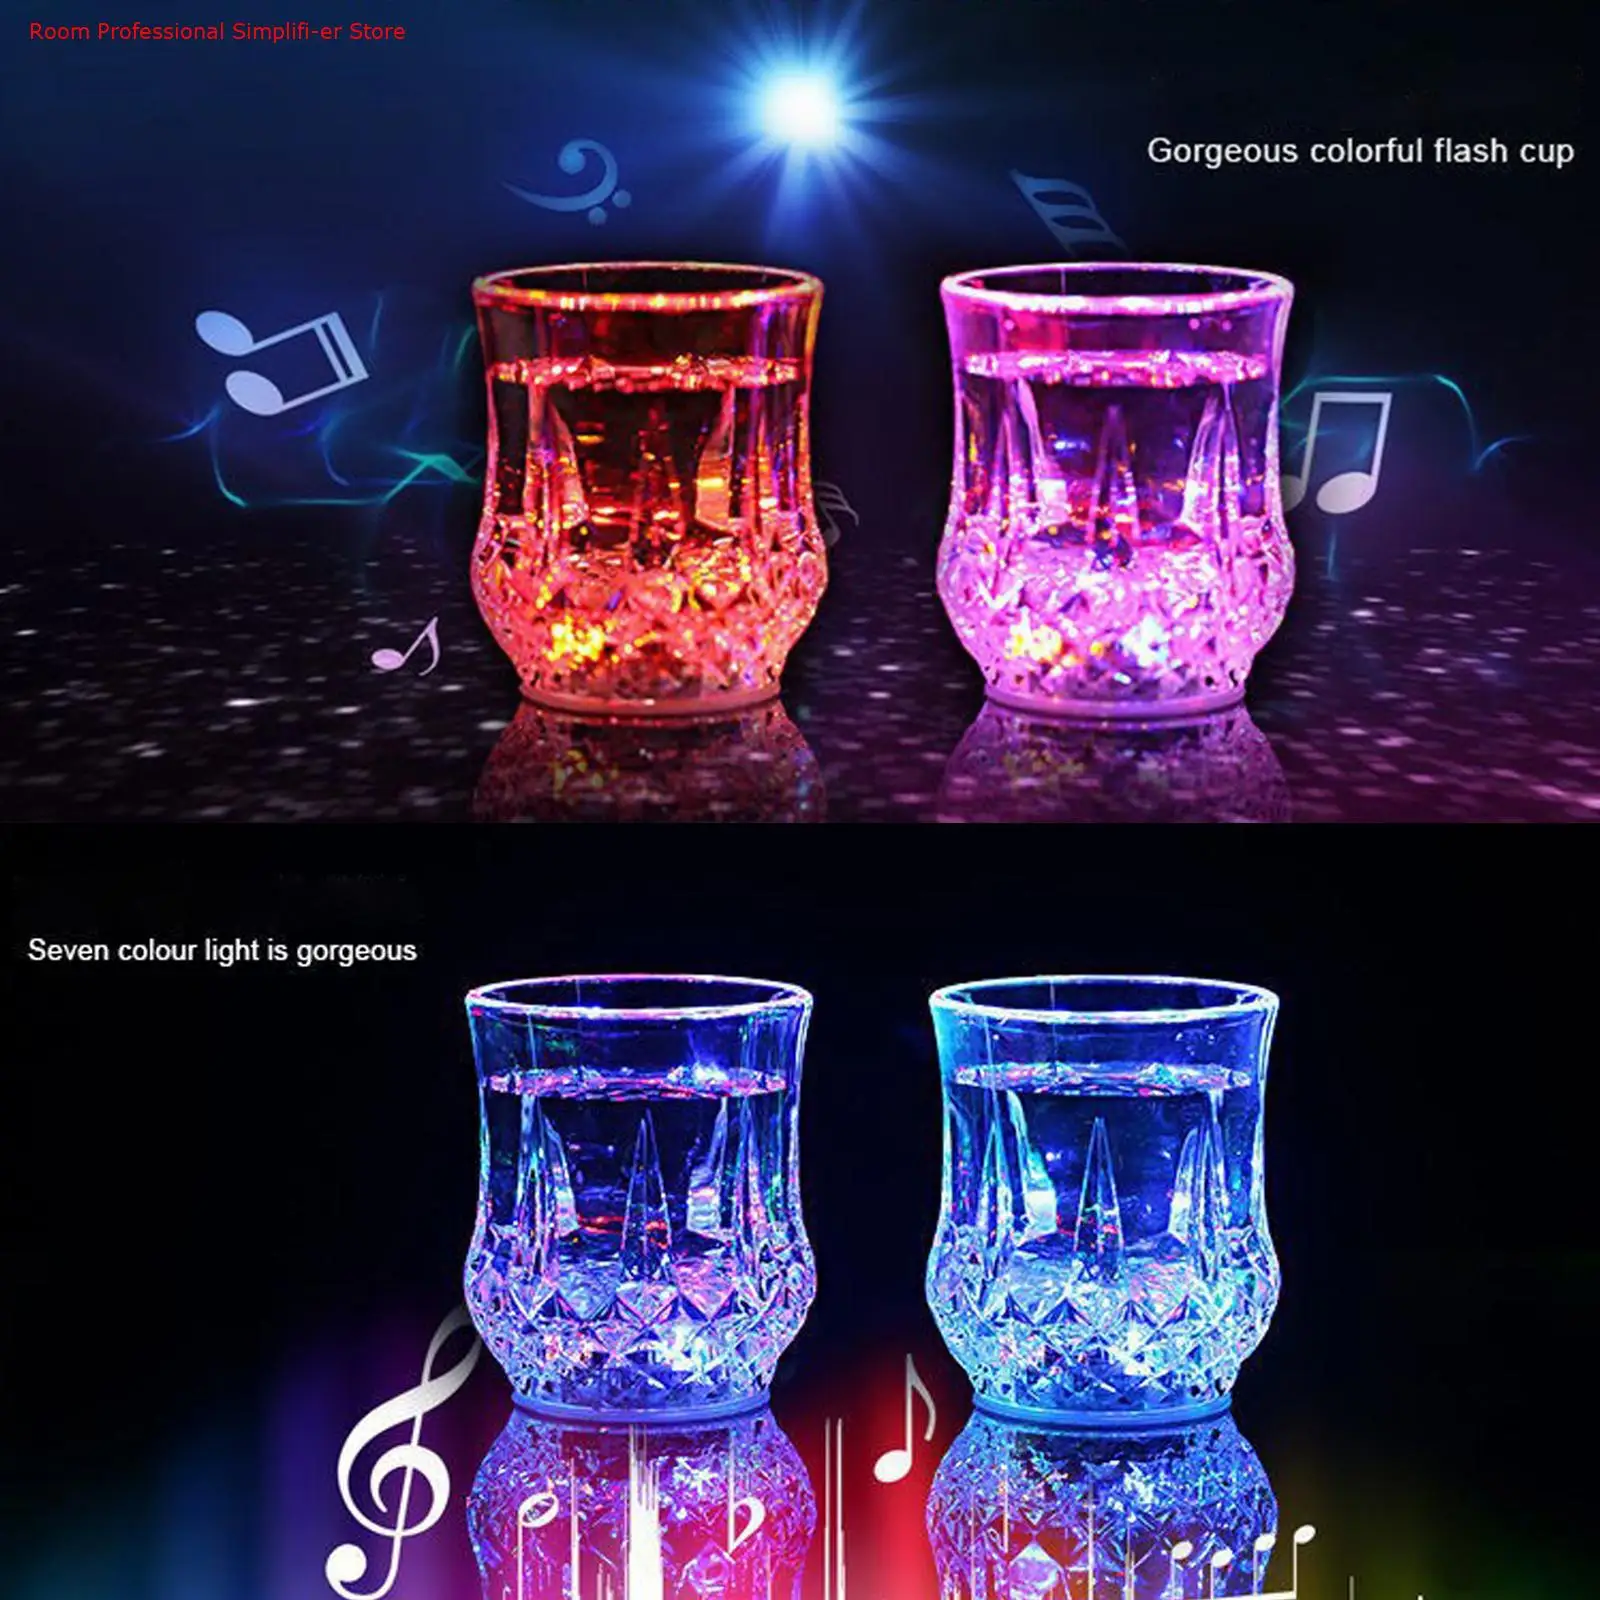 LED cup Automatic Flashing Cups Multi-color Light Up Mugs Wine Beer Mugs  Whisky Drink Cups for Party Kitchen Christmas Decor